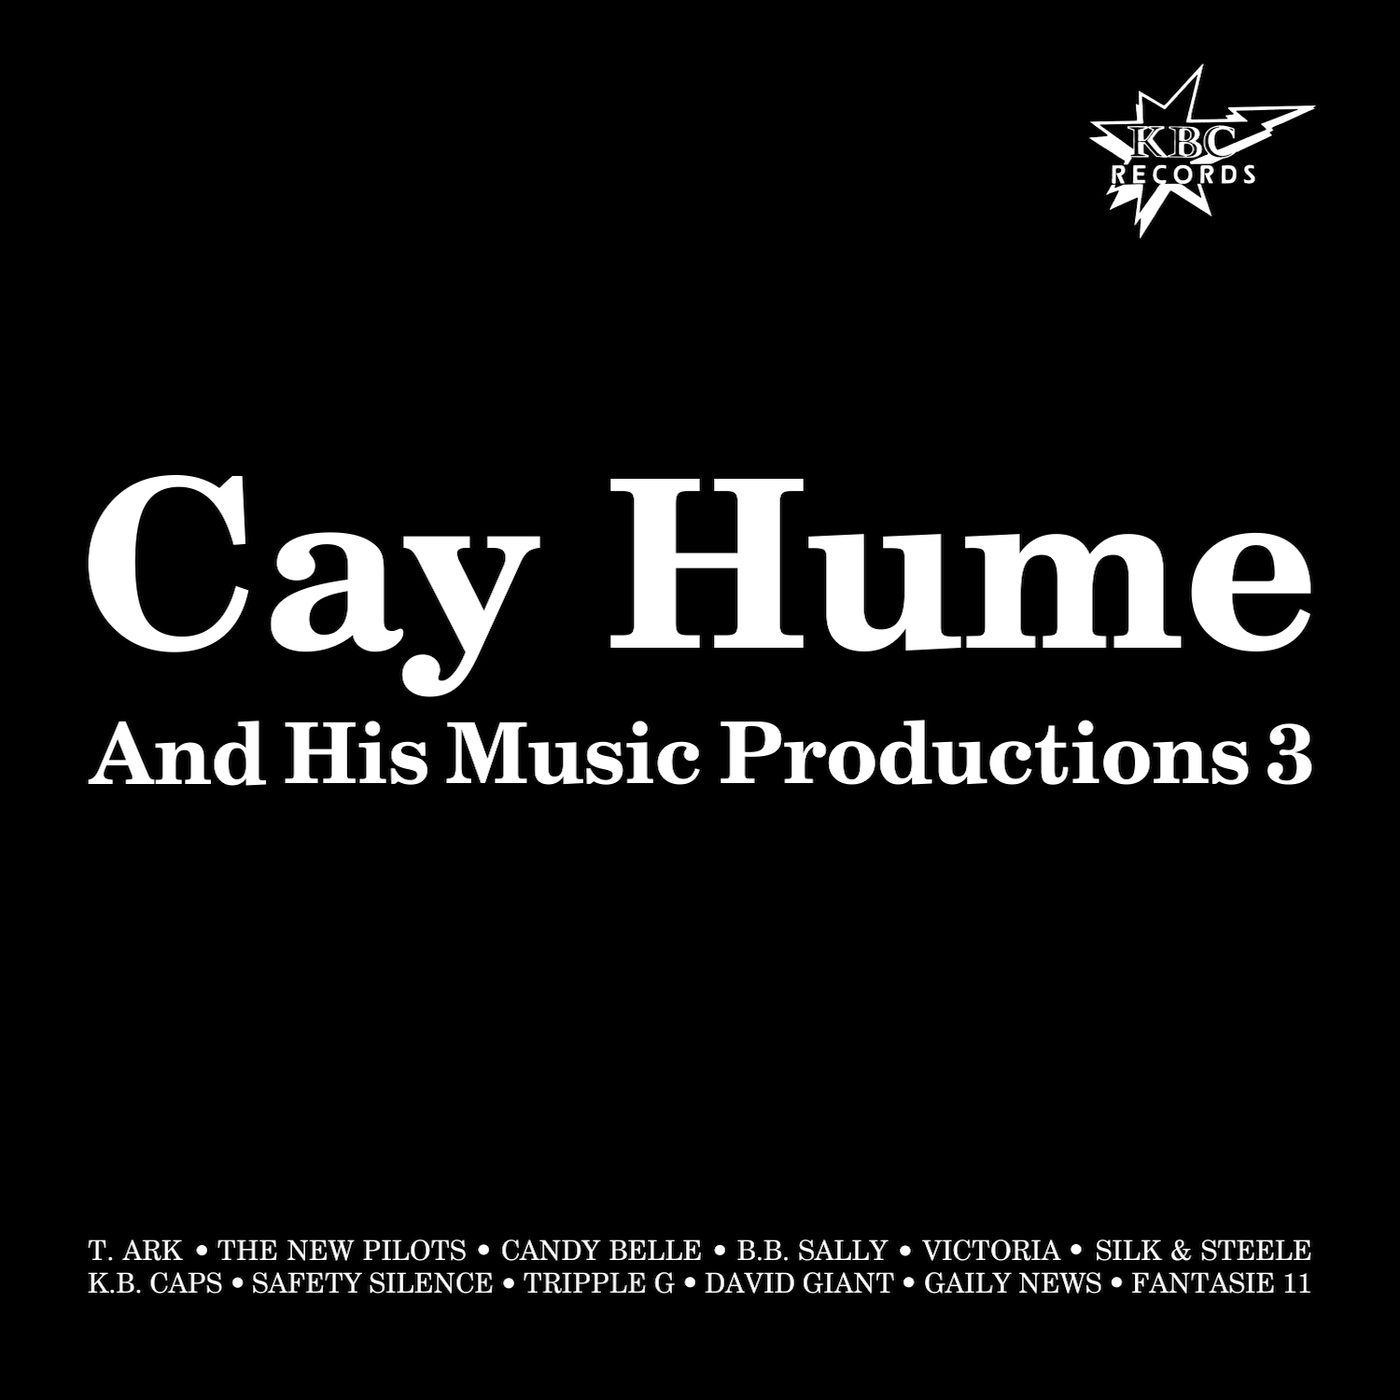 Cay Hume And His Music Productions Vol. 3 (2017 · FLAC+MP3)